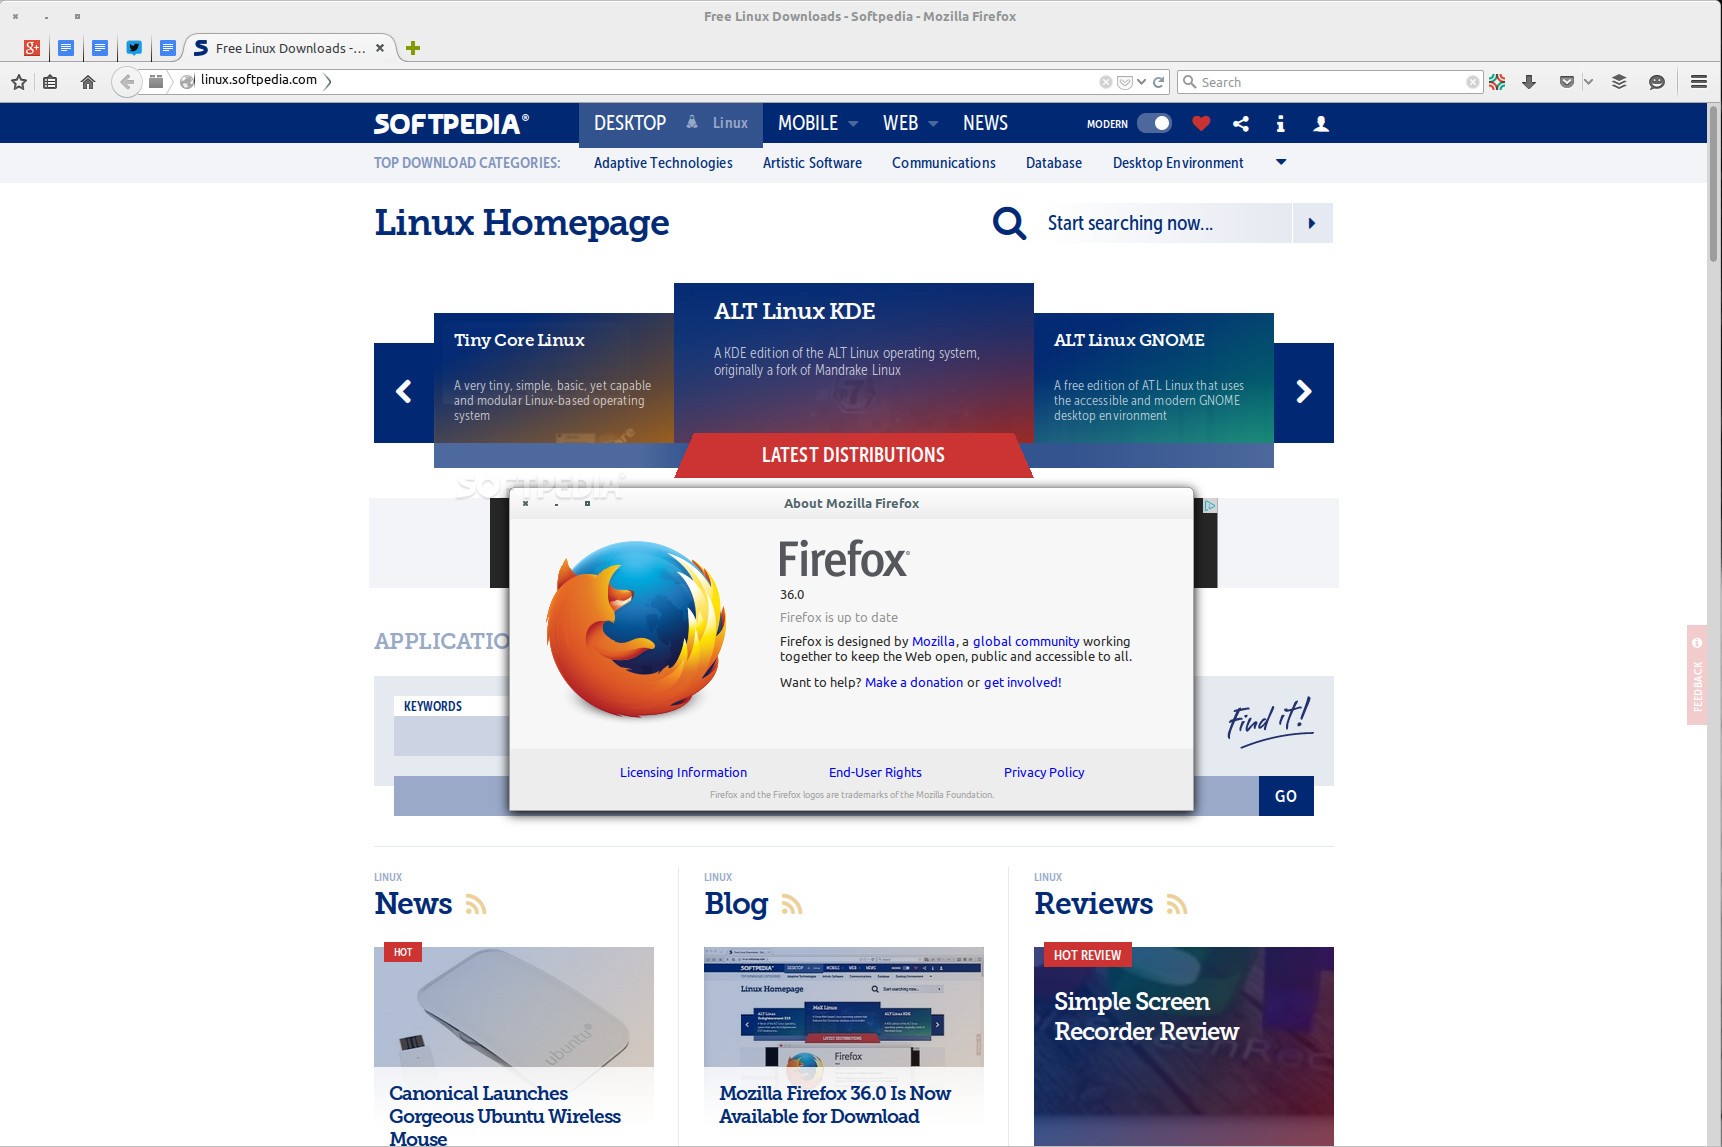 Mozilla-Firefox-36-0-Is-Now-Available-for-Download-474083-3.jpg